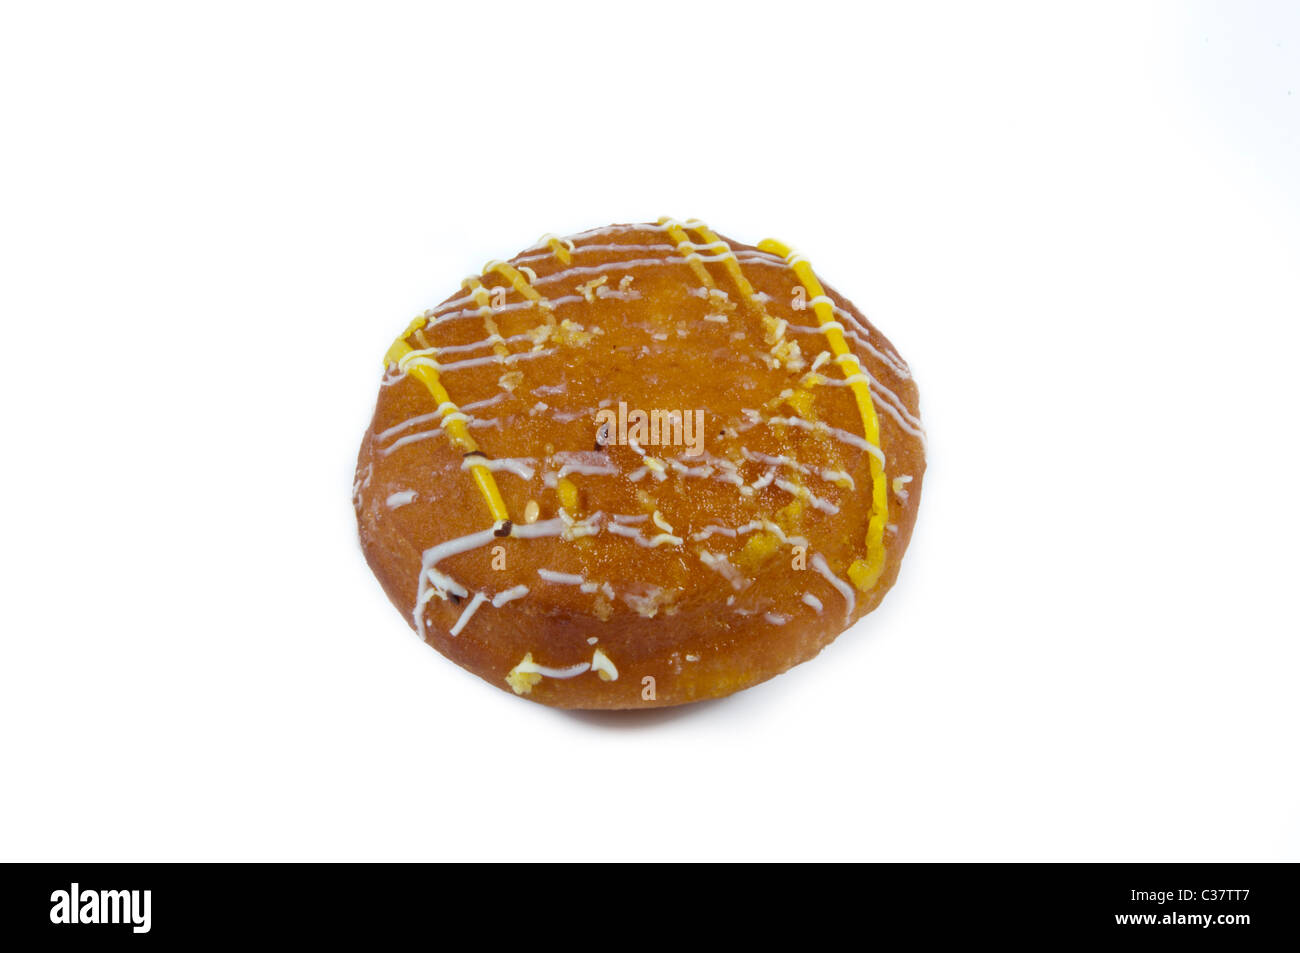 Sugar coated  donut in white background Stock Photo